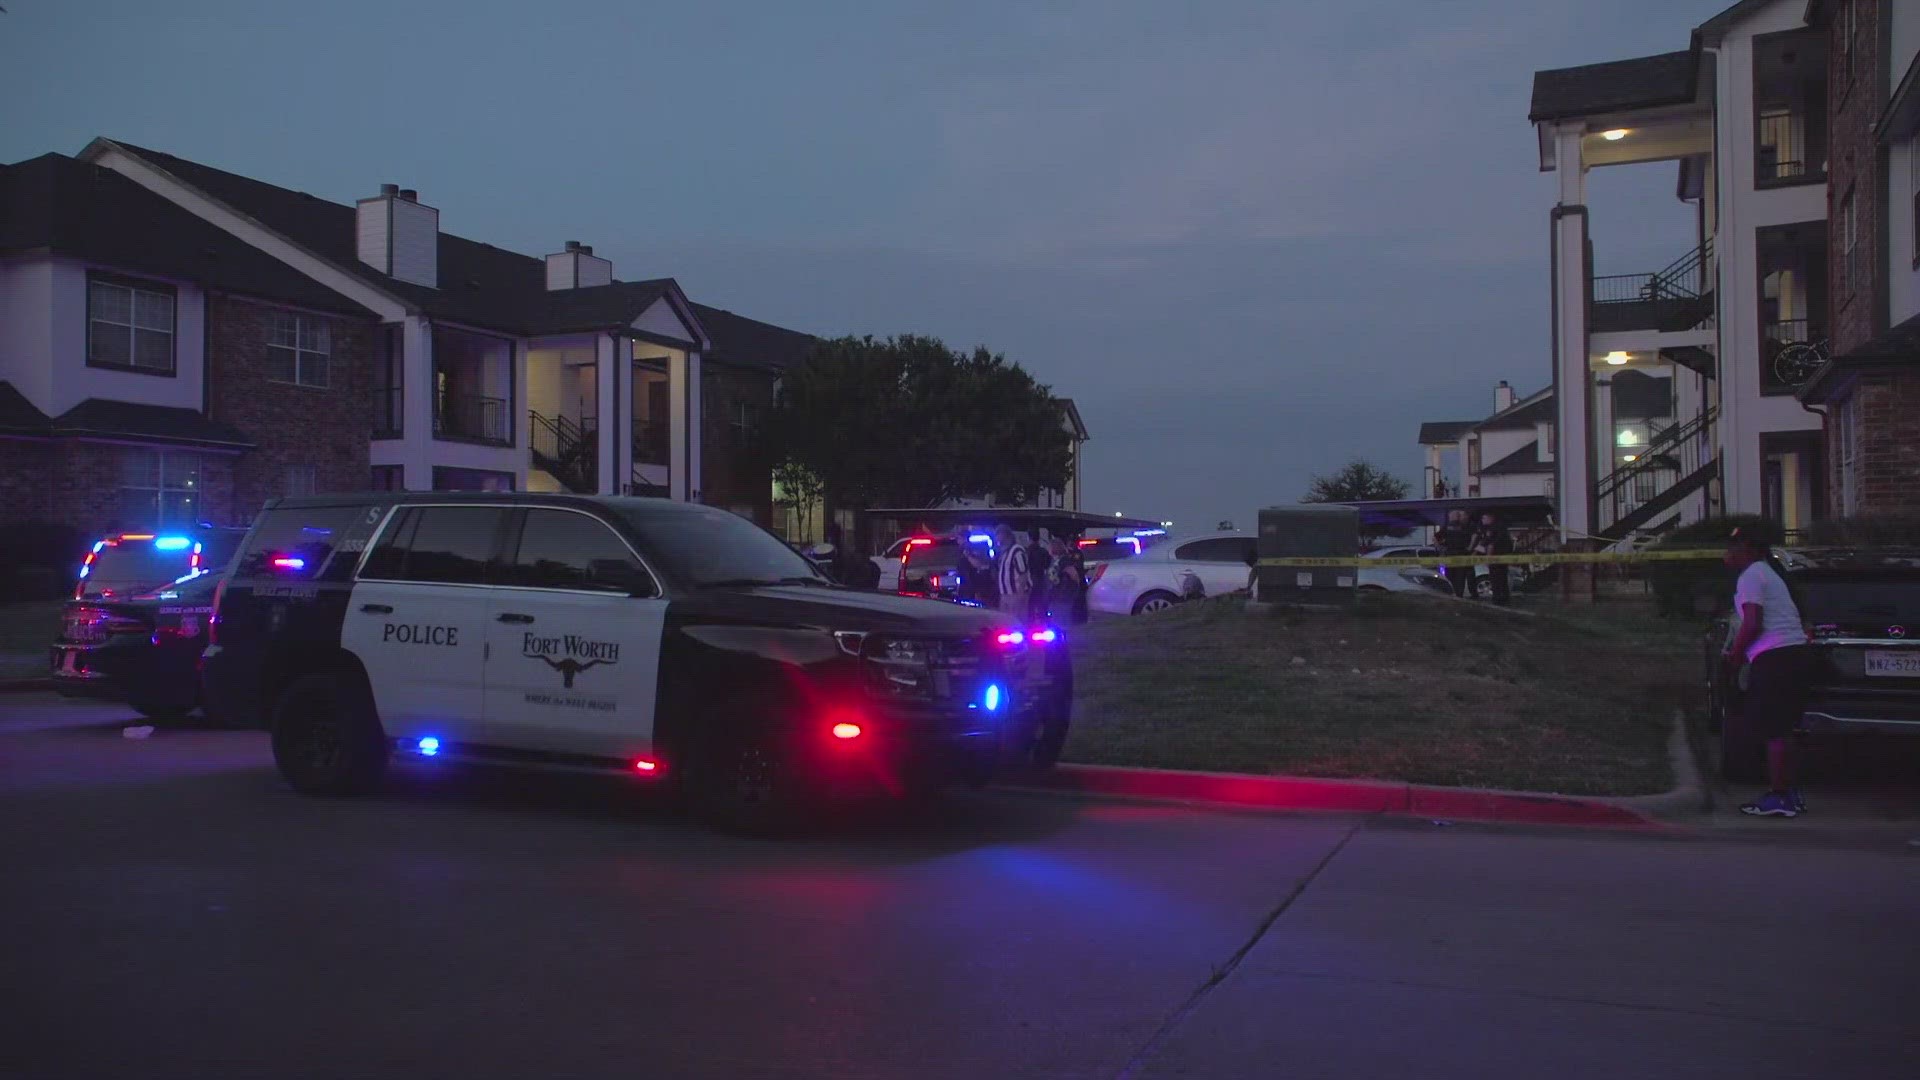 Neighbors said they heard multiple gunshots. As of Tuesday, the only information Fort Worth PD has provided is that a juvenile male was shot and killed.